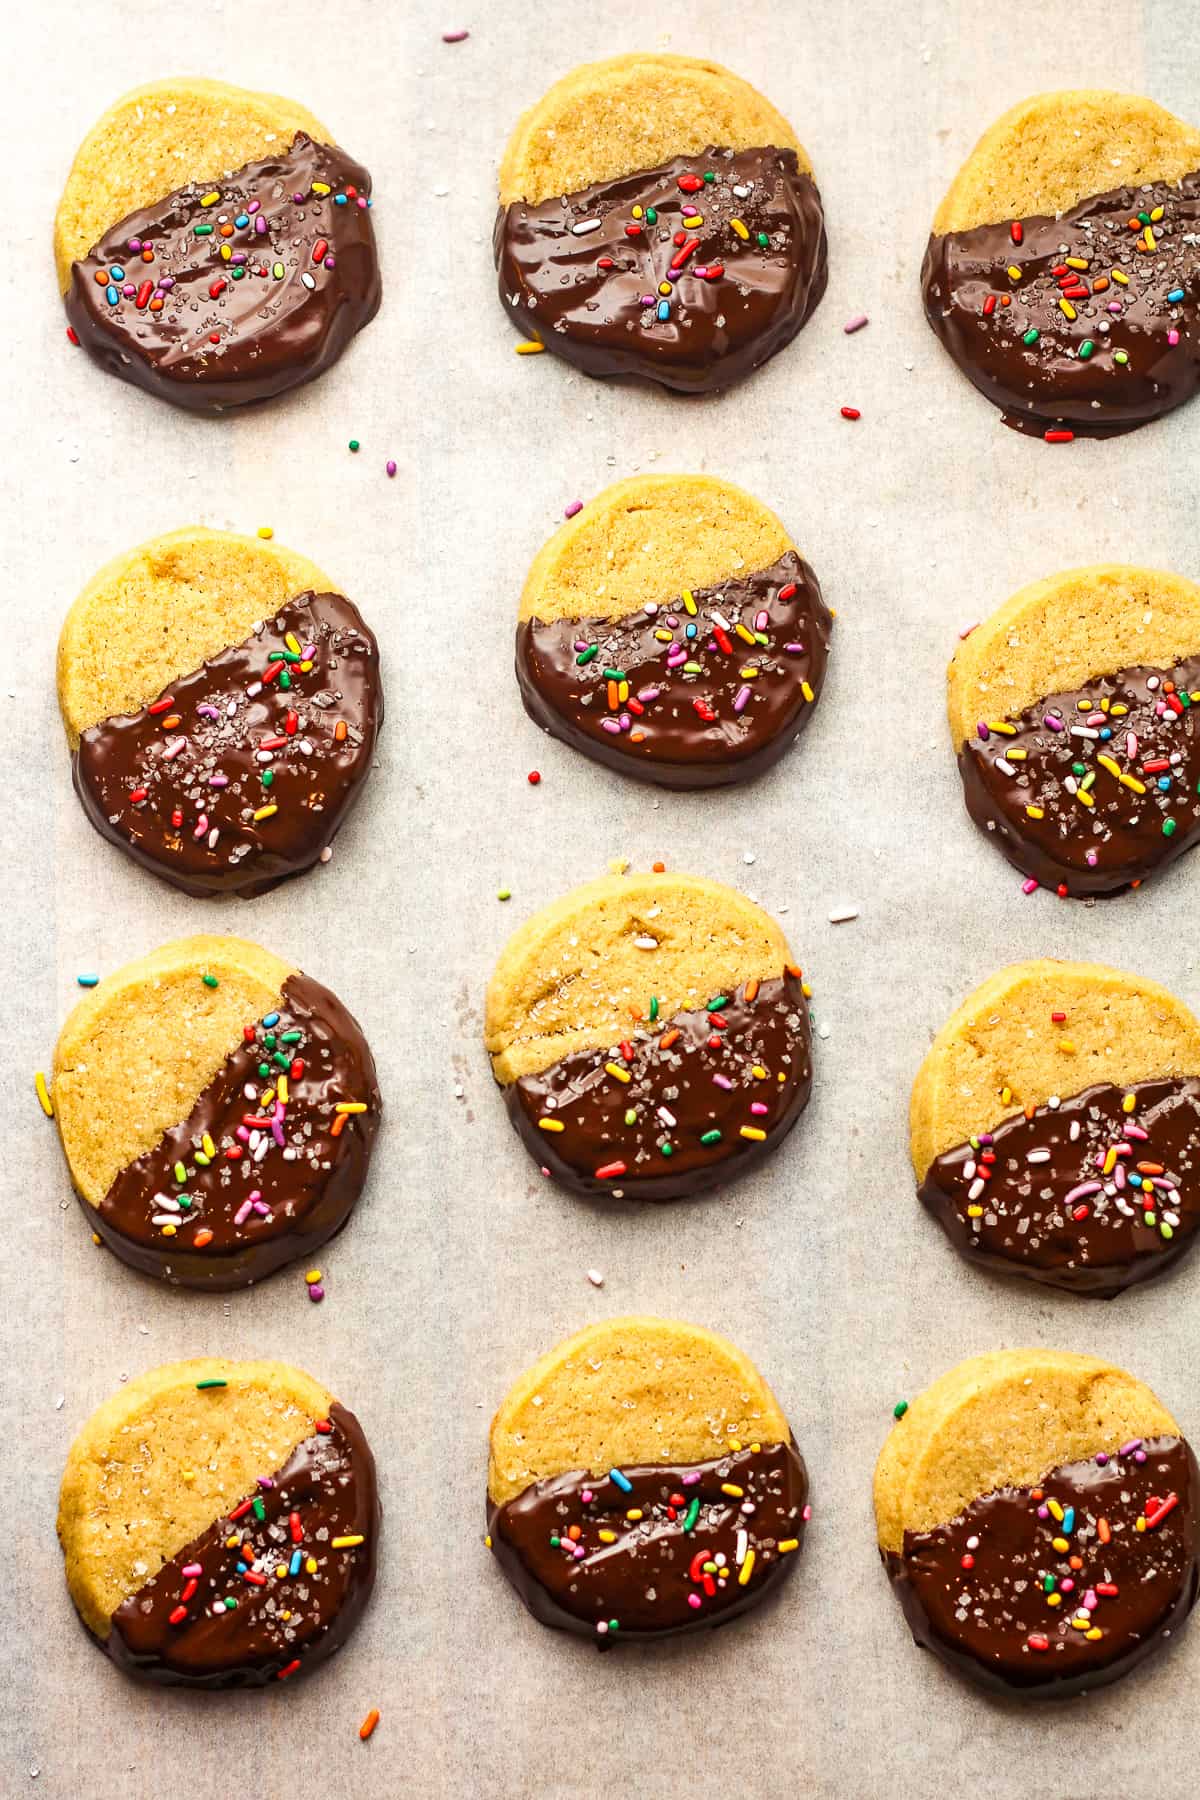 12 chocolate dipped shortbread cookies on white parchment paper.